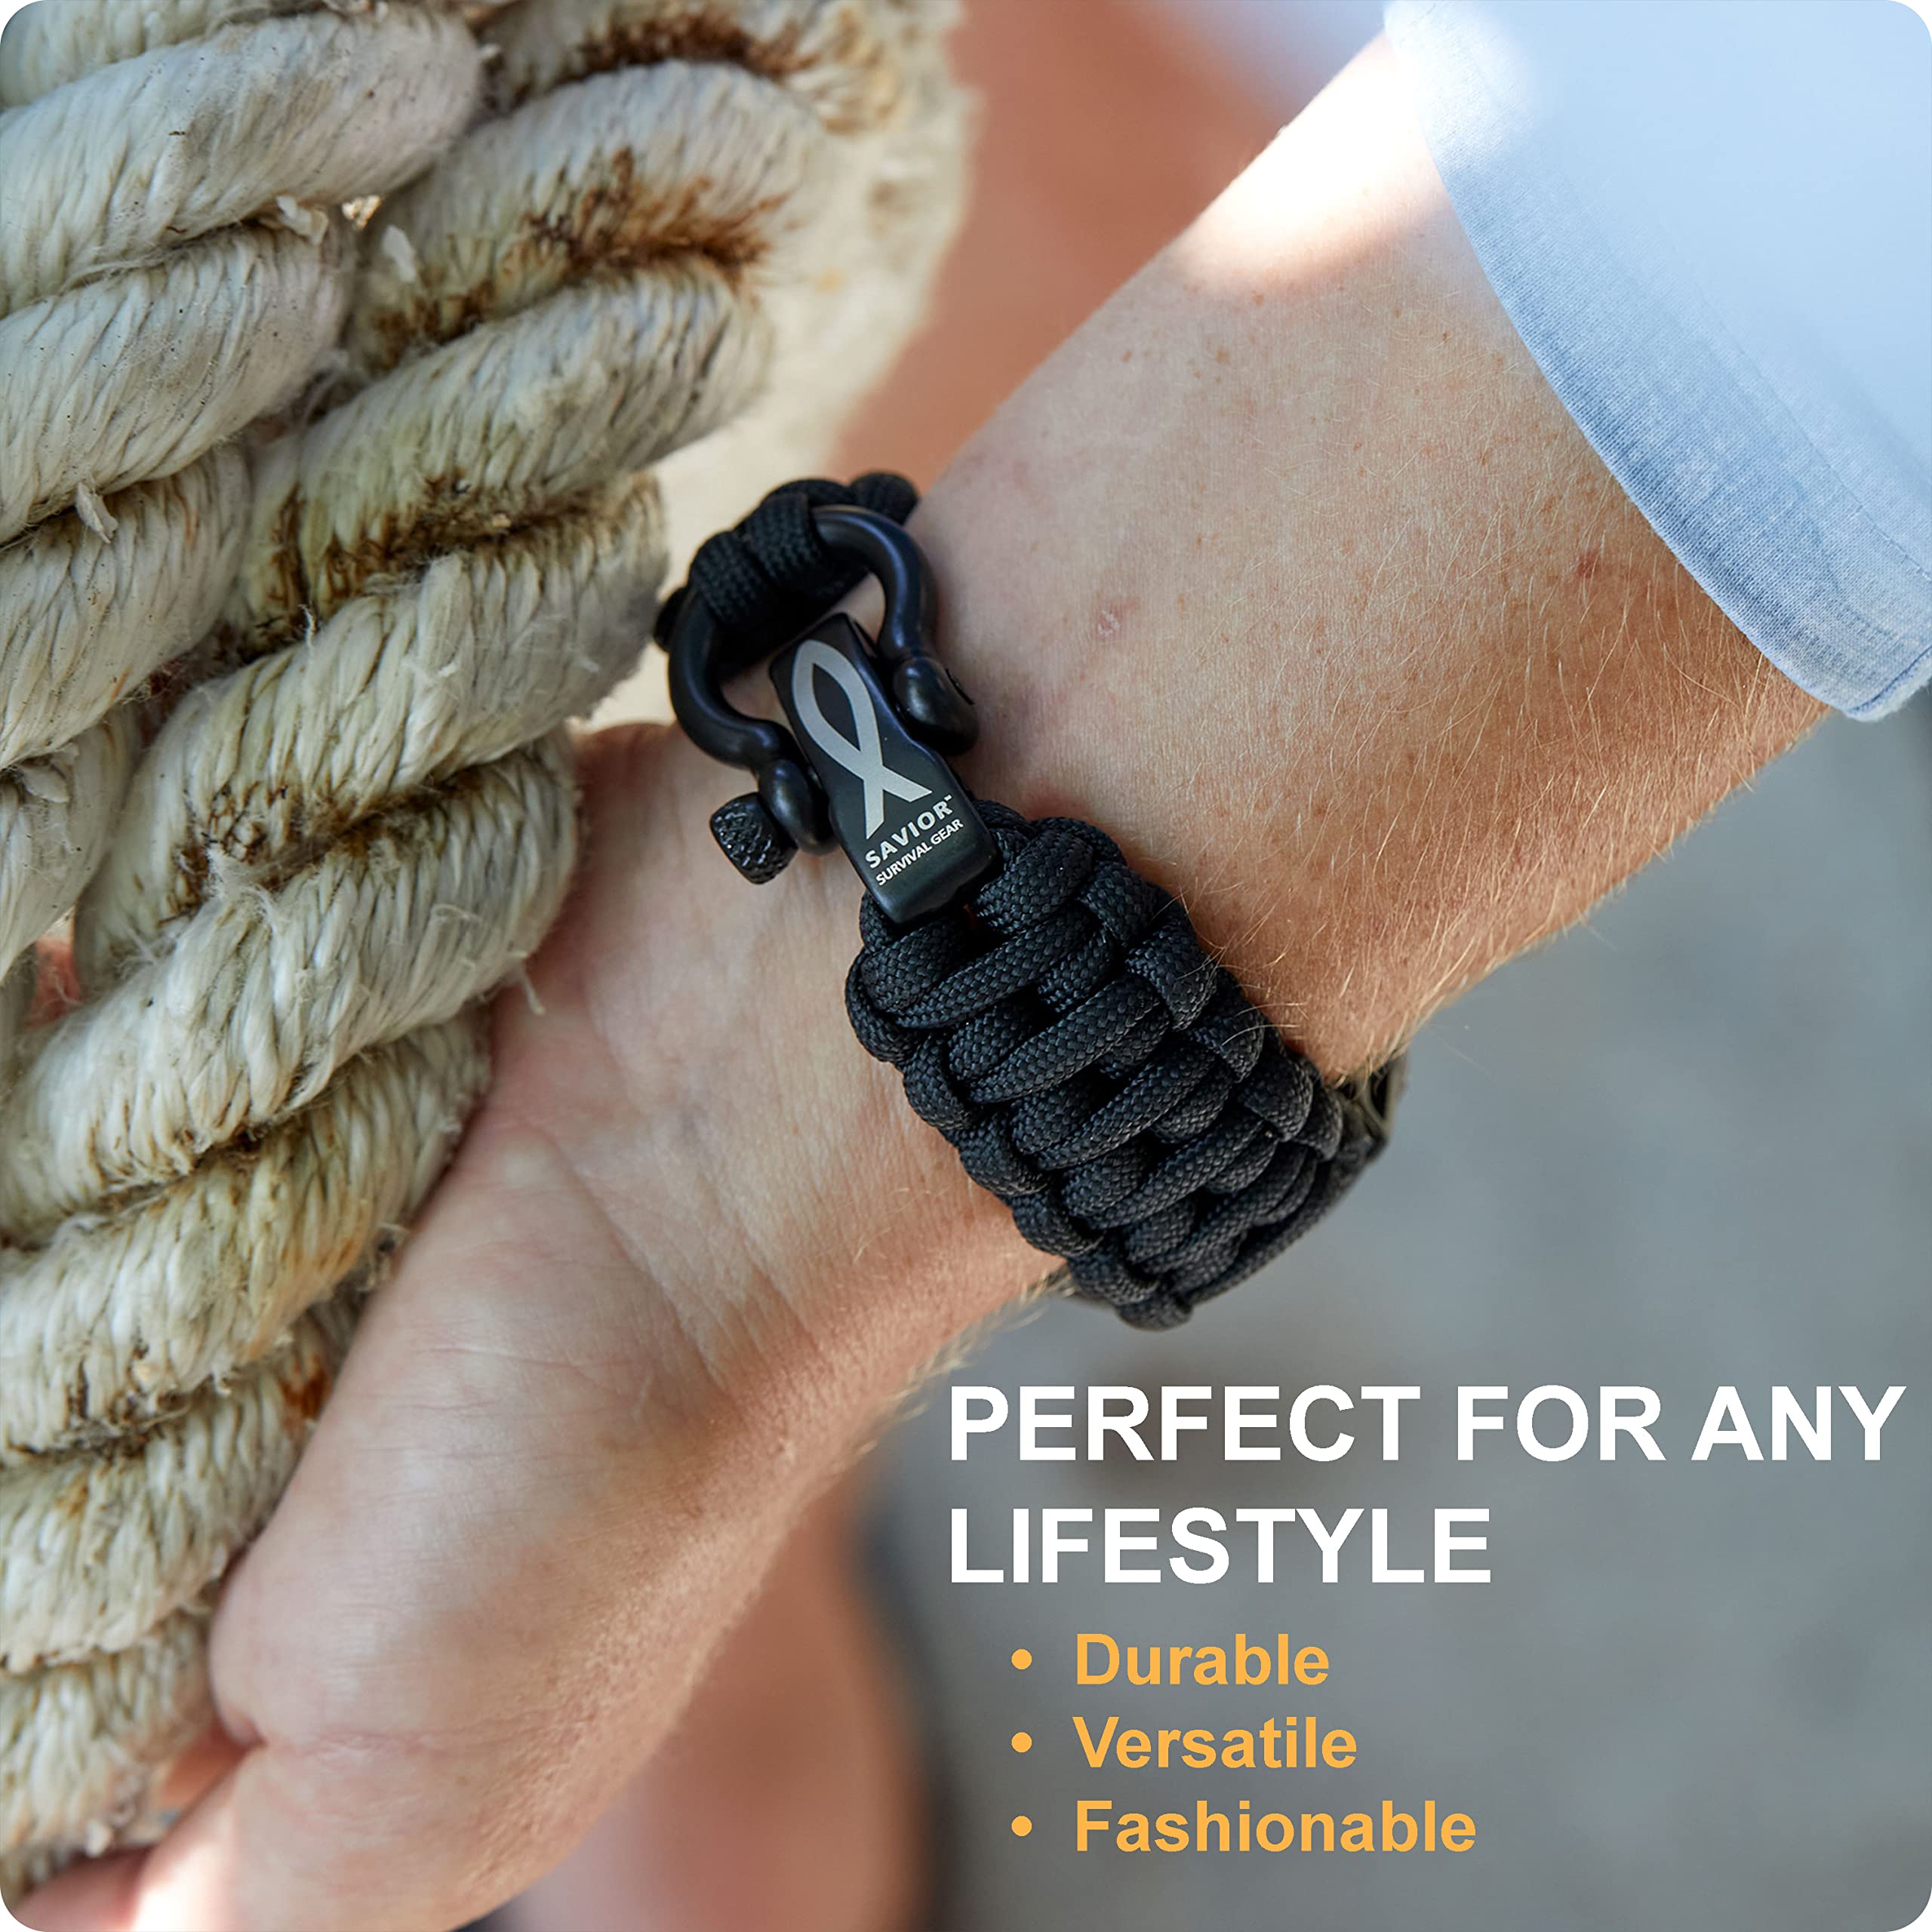 Savior Survival Gear Paracord Watch Band - Compatible with Apple Watch & iWatch Bands Series 42mm 44mm 45mm 49mm, 550 Paracord & Stainless Steel Shackle, Adjustable Straps, Men & Women (Black, Large)